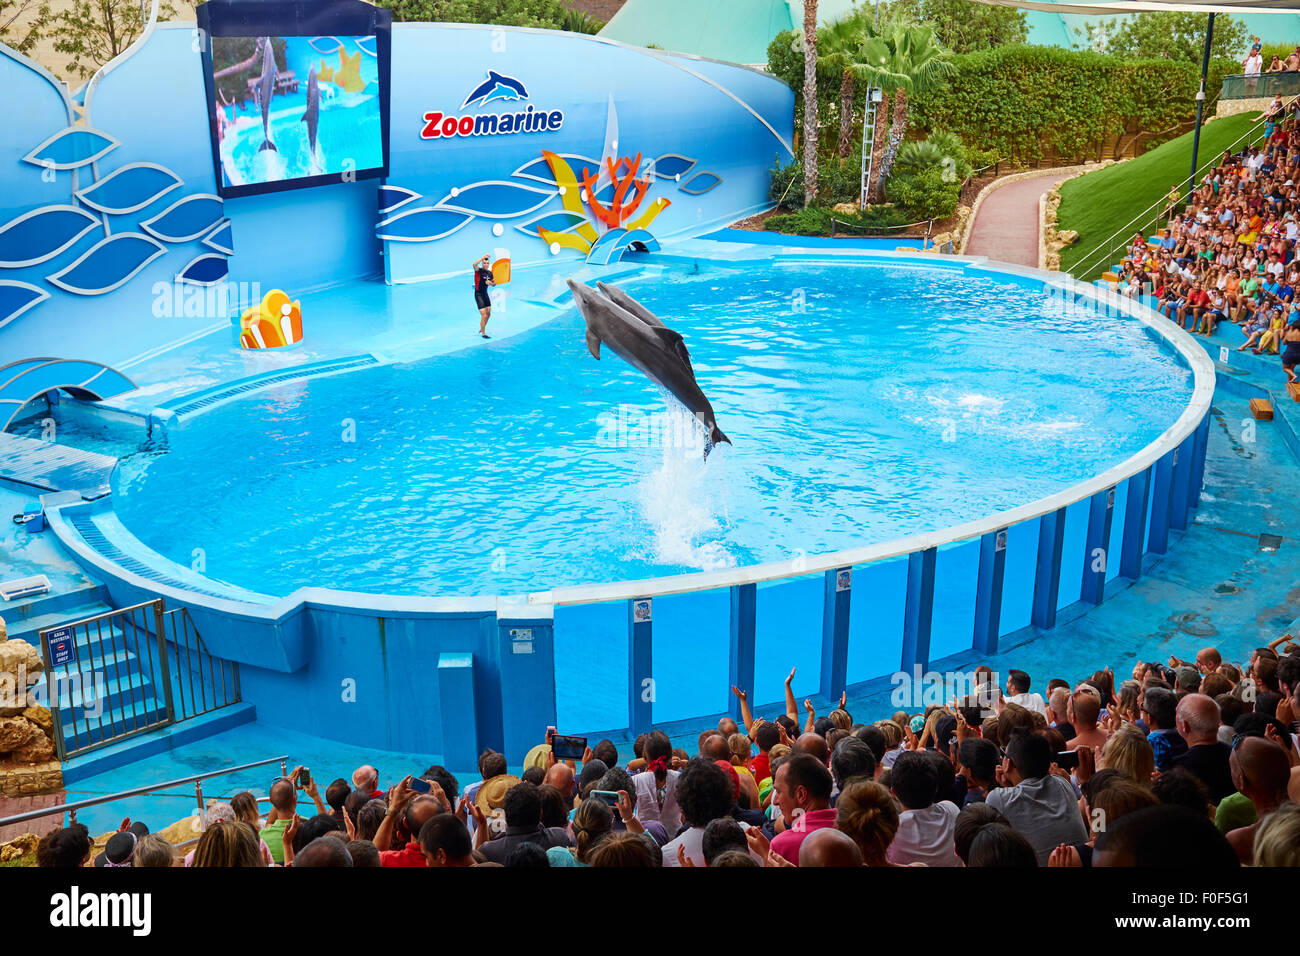 Dolphin Show At The Zoomarine Theme Park Guia Algarve Portugal Stock ...